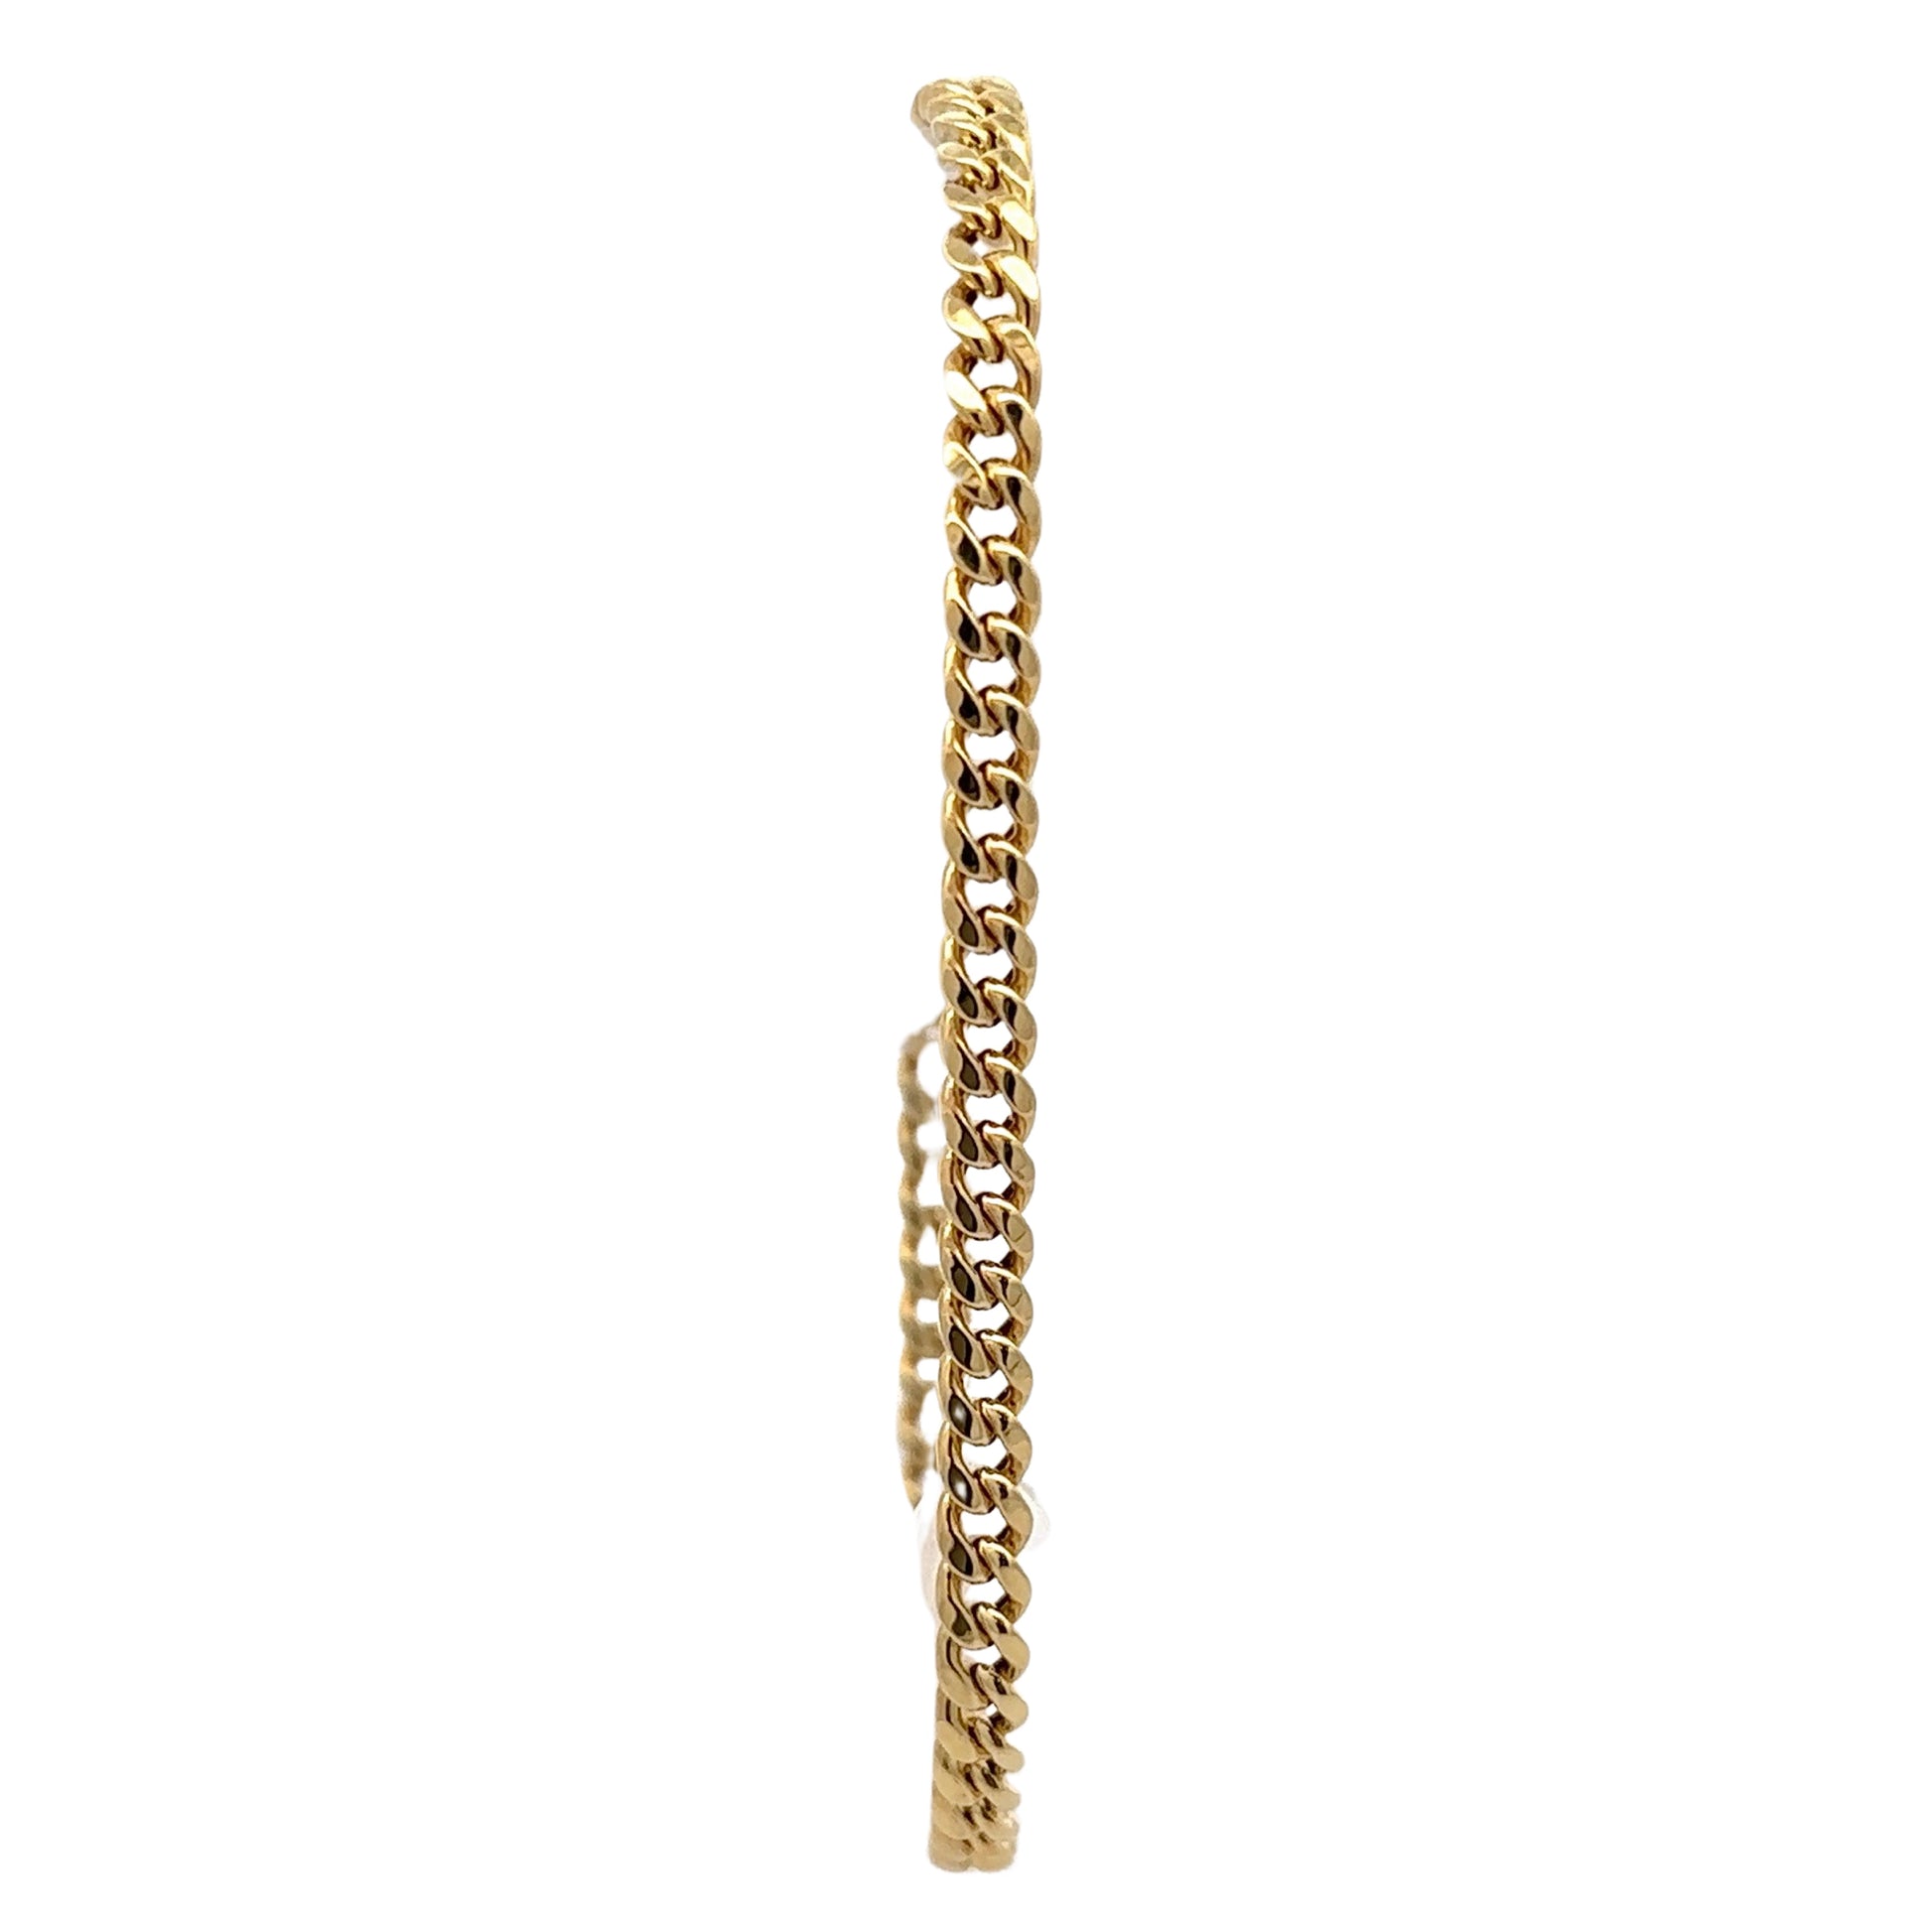 Front of yellow gold curb link bracelet